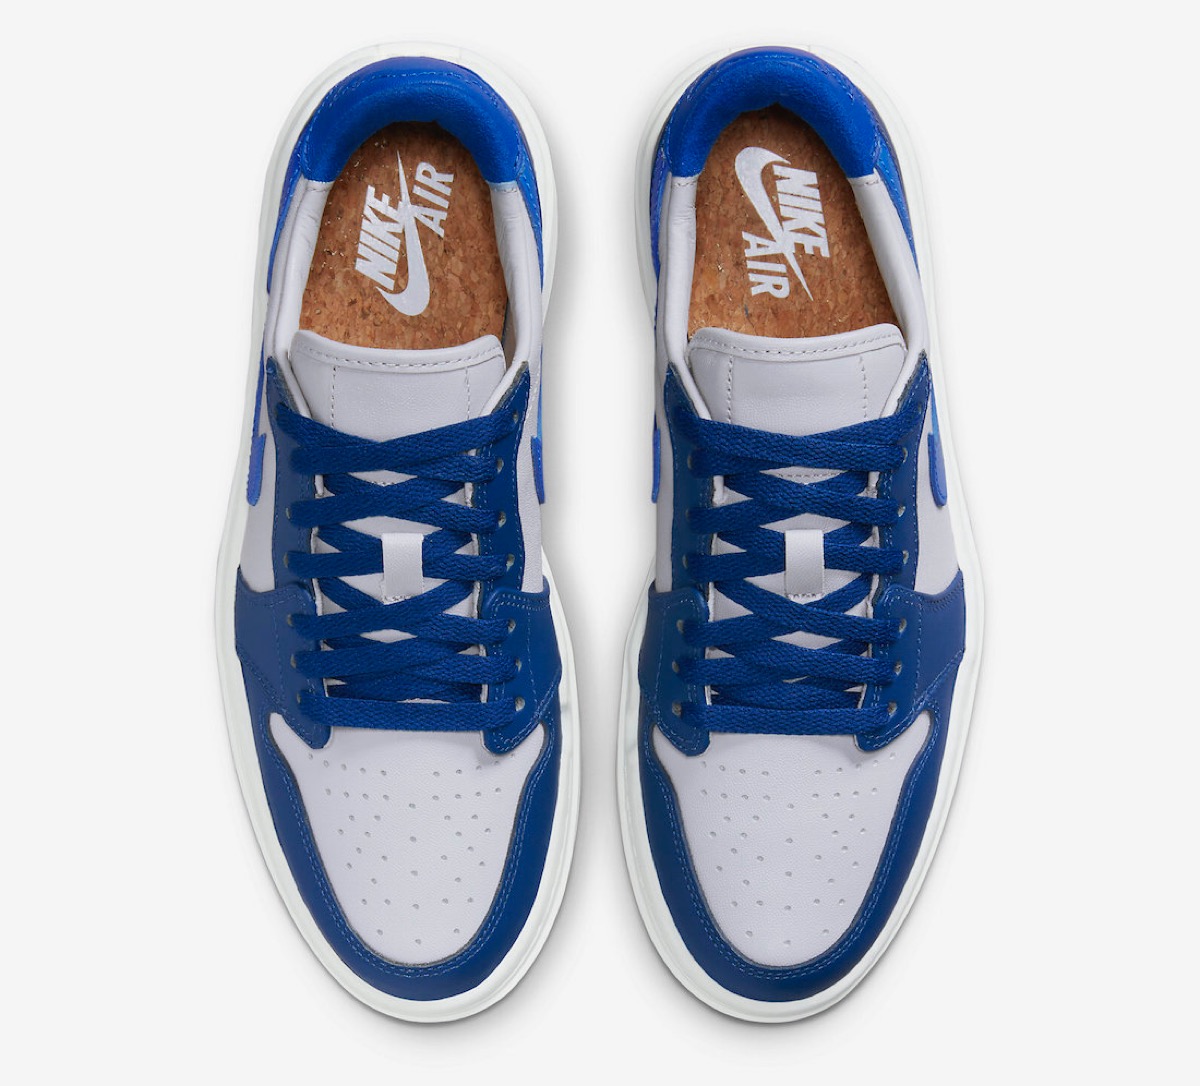 Nike Wmns Air Jordan 1 Elevate Low “French Blue”が国内4月11日に